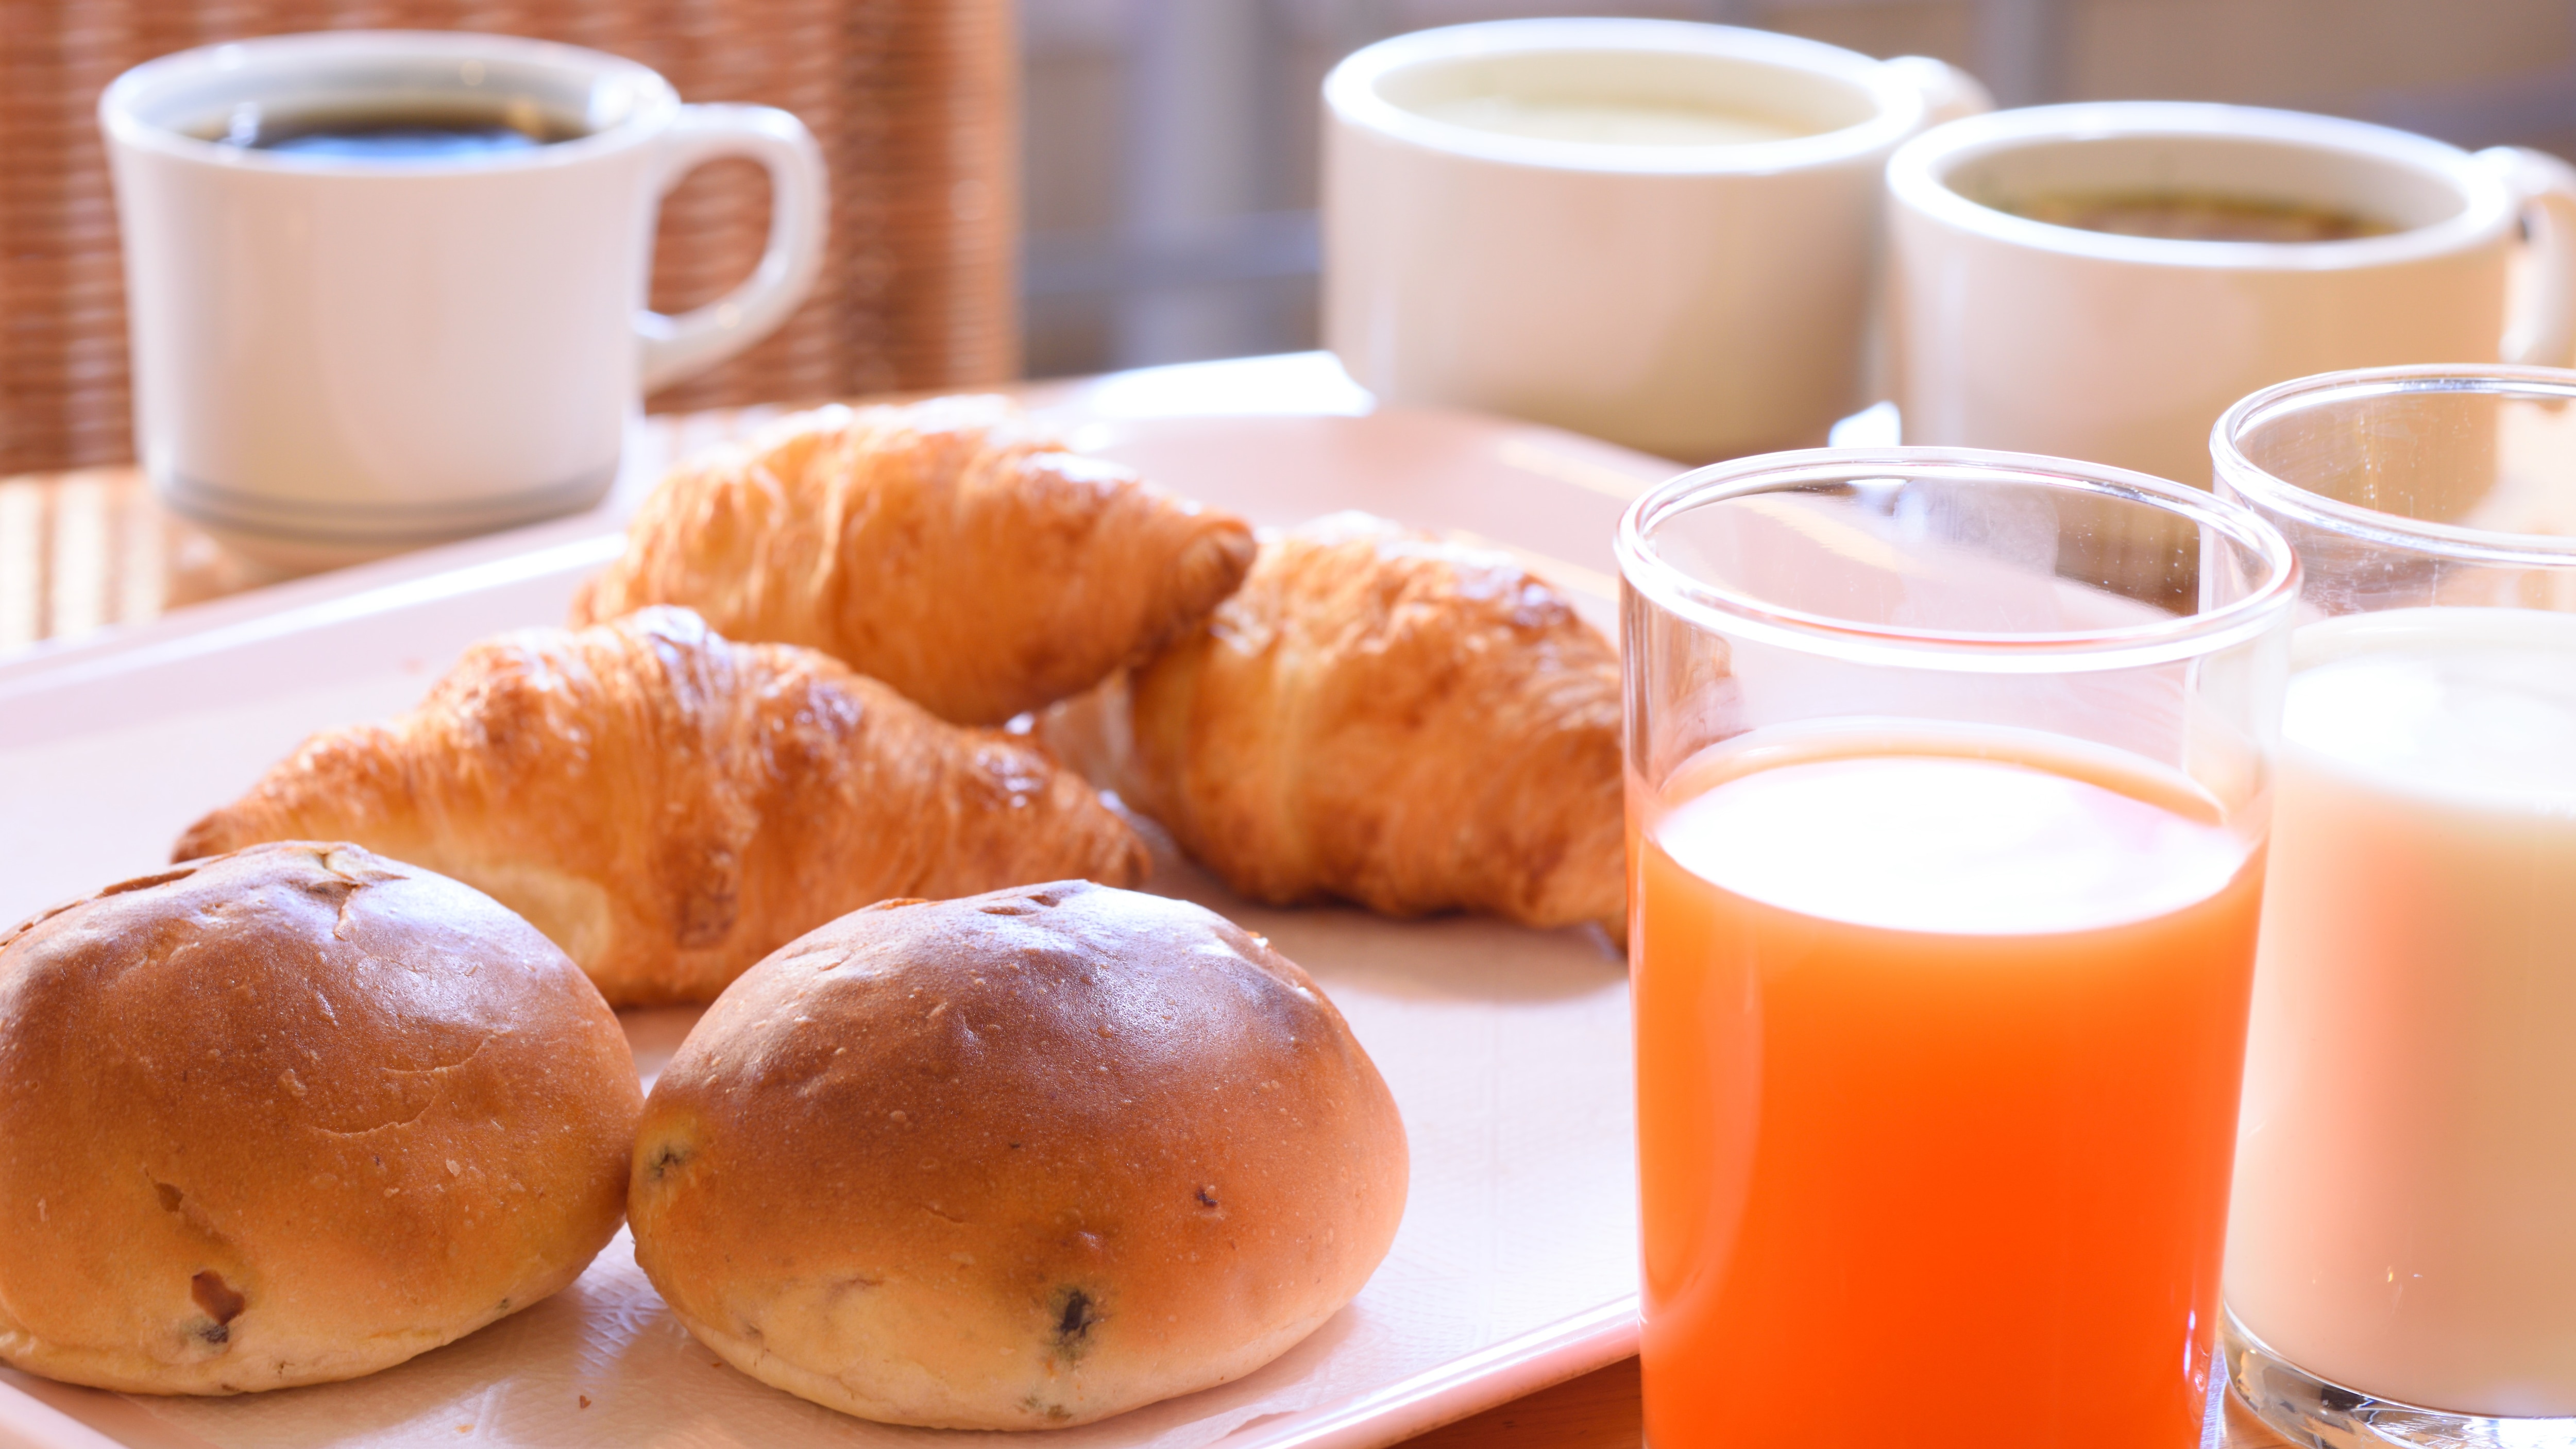 [Light breakfast information] We offer light meals such as freshly baked bread and drinks. From 7:00 to 9:00 (3rd floor lobby)